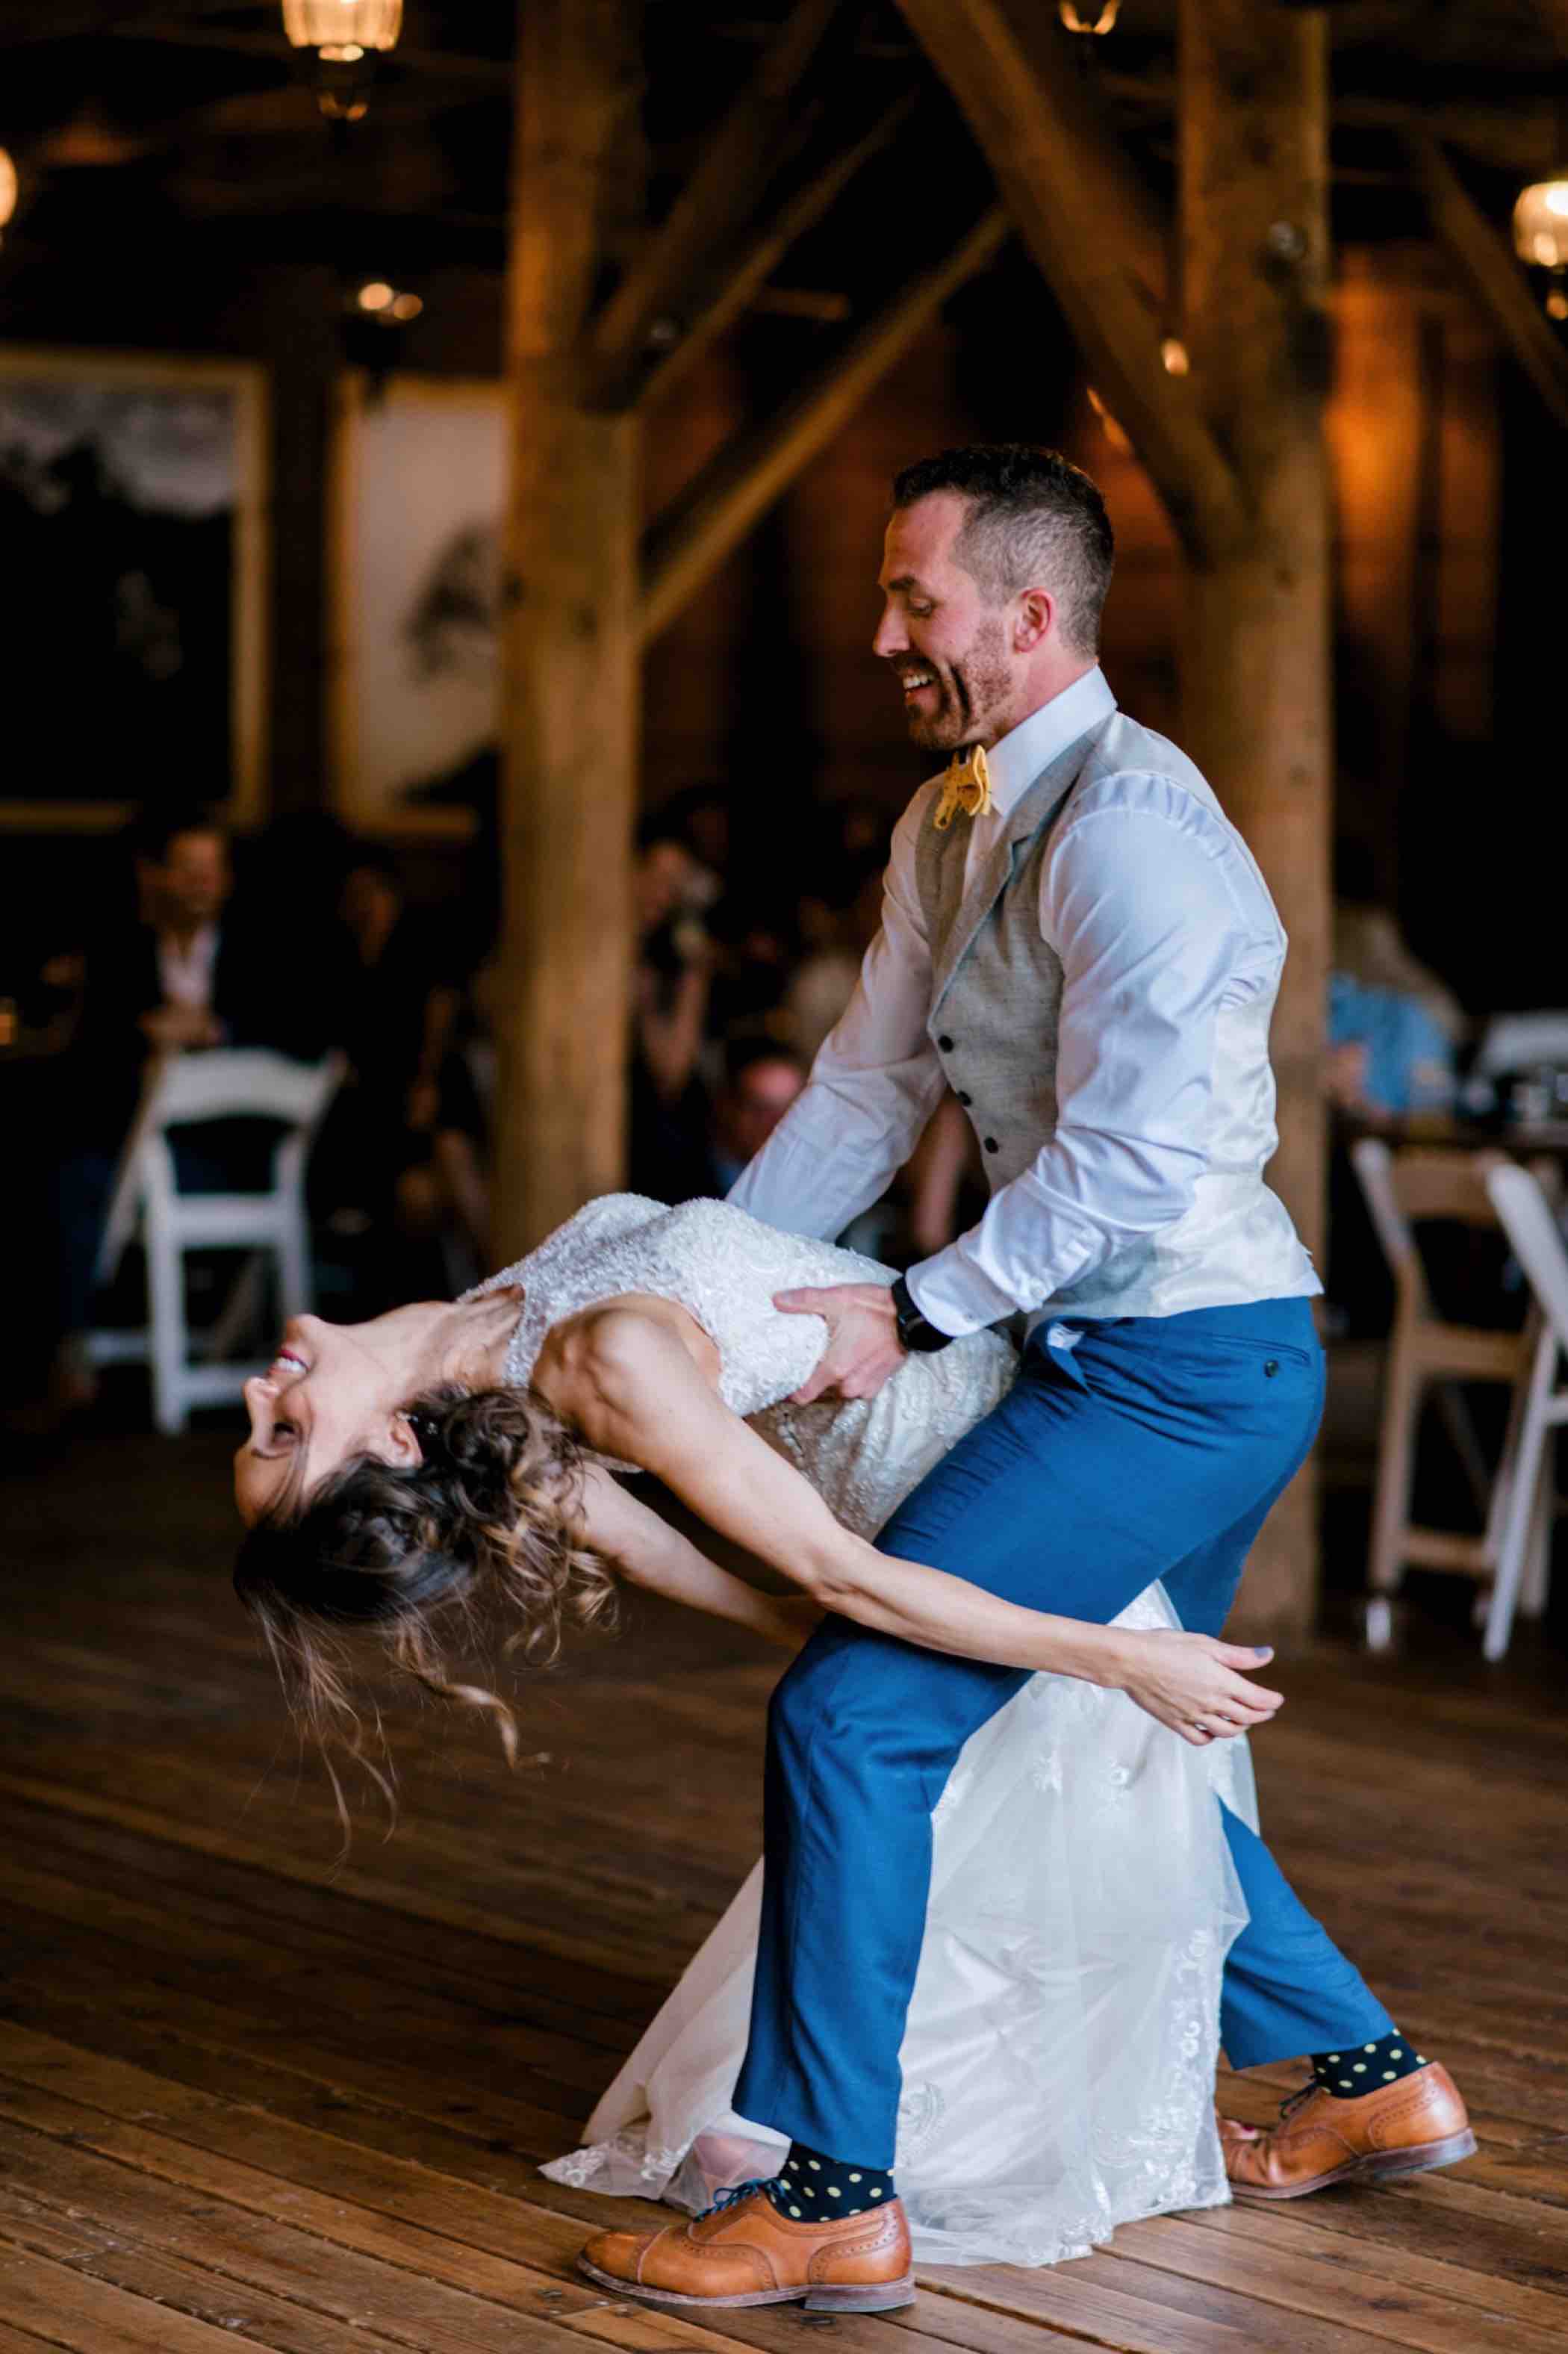 Bride and groom's first dance at their wedding reception in Piney River Ranch in Vail, Colorado. Photo by Ali and Garrett, Romantic, Adventurous, Nostalgic Wedding Photographers.